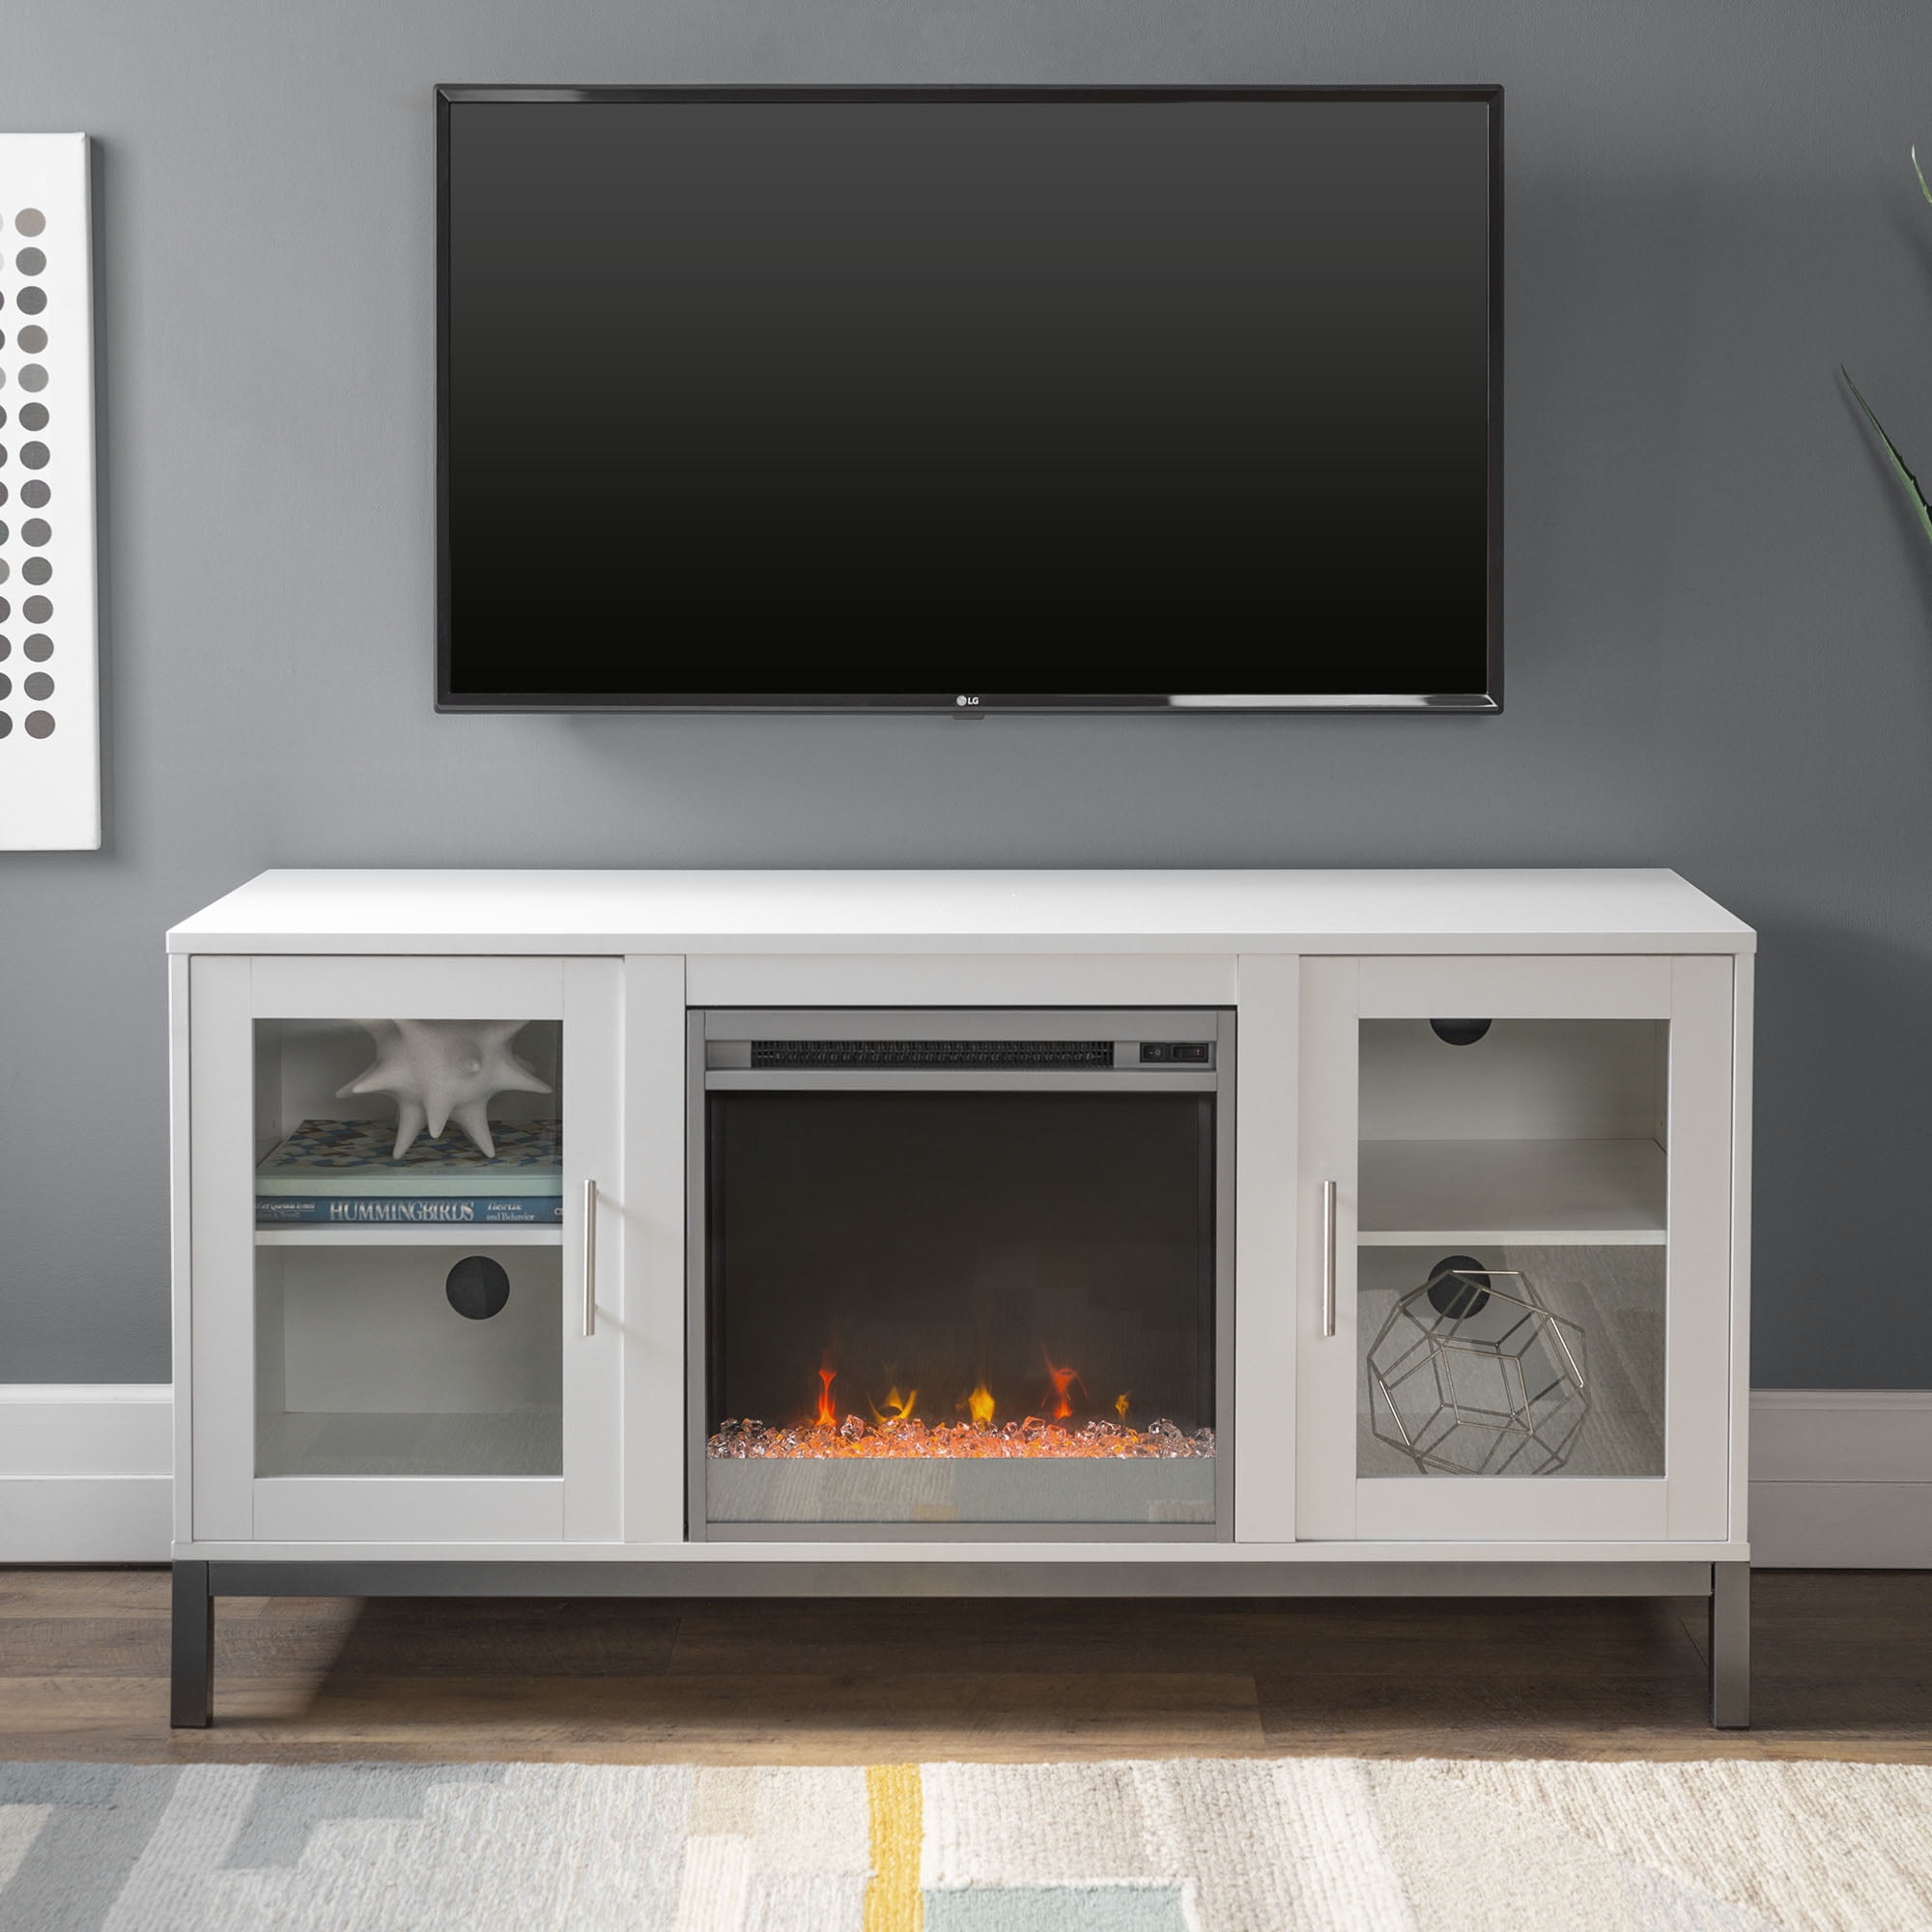 Manor Park Modern Fireplace Tv Stand, Modern Tv Stands With Fireplace